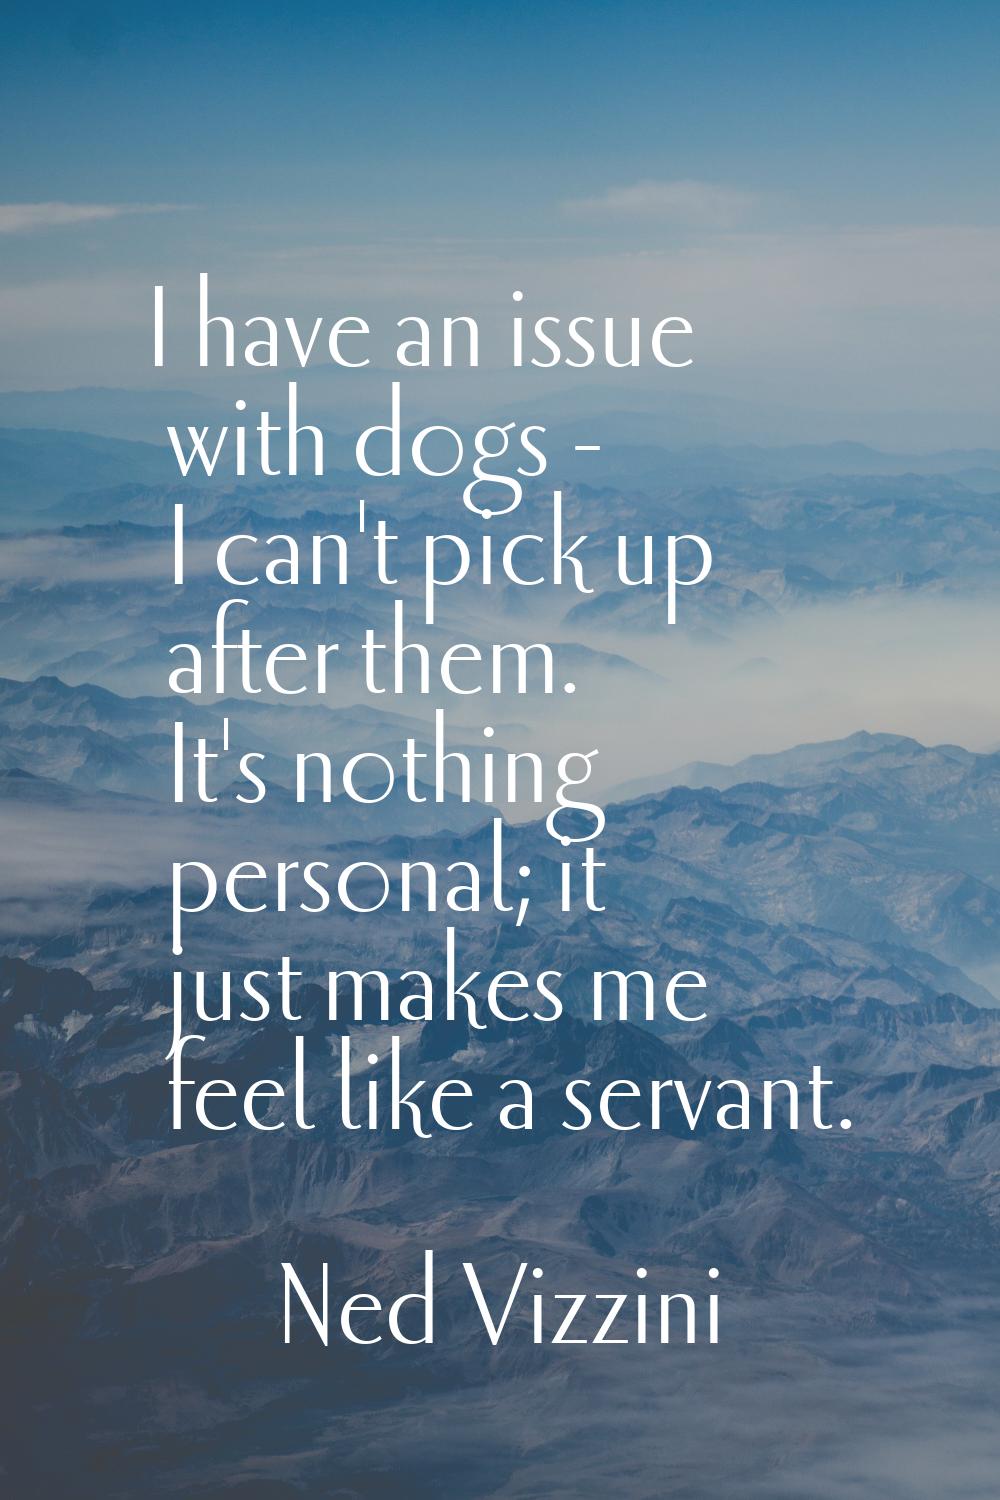 I have an issue with dogs - I can't pick up after them. It's nothing personal; it just makes me fee